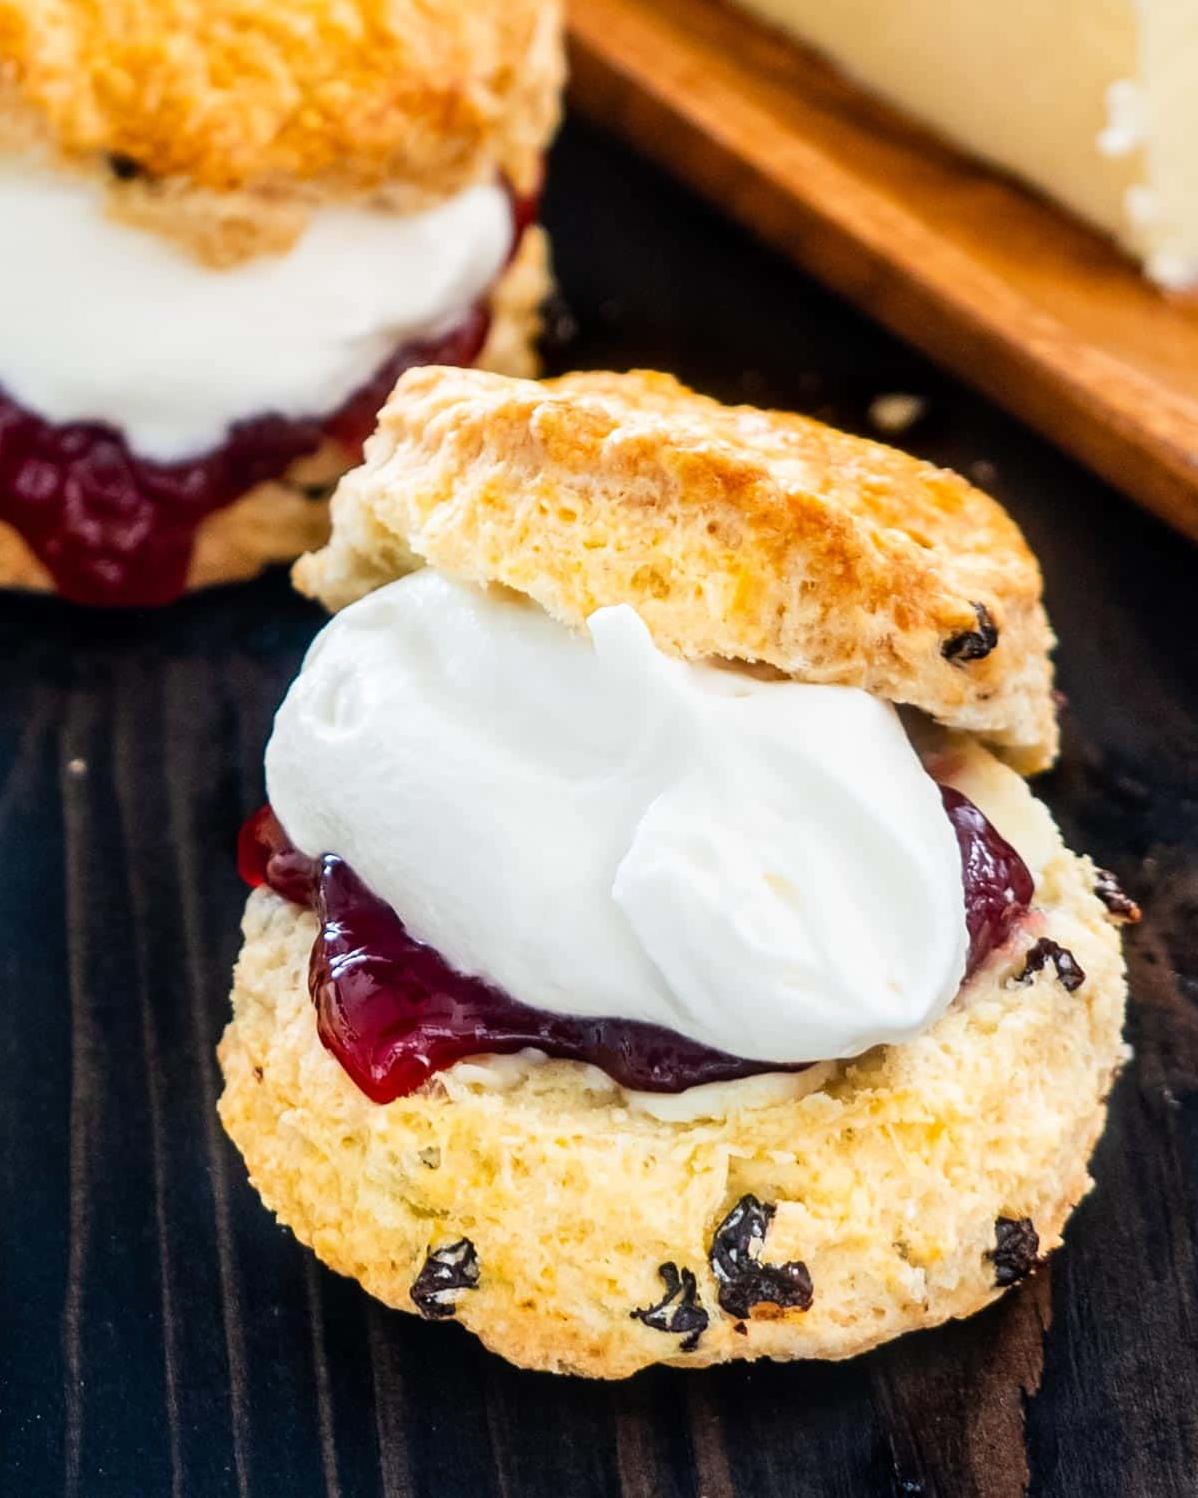  Just one bite of these delicious scones will transport you straight to Ireland